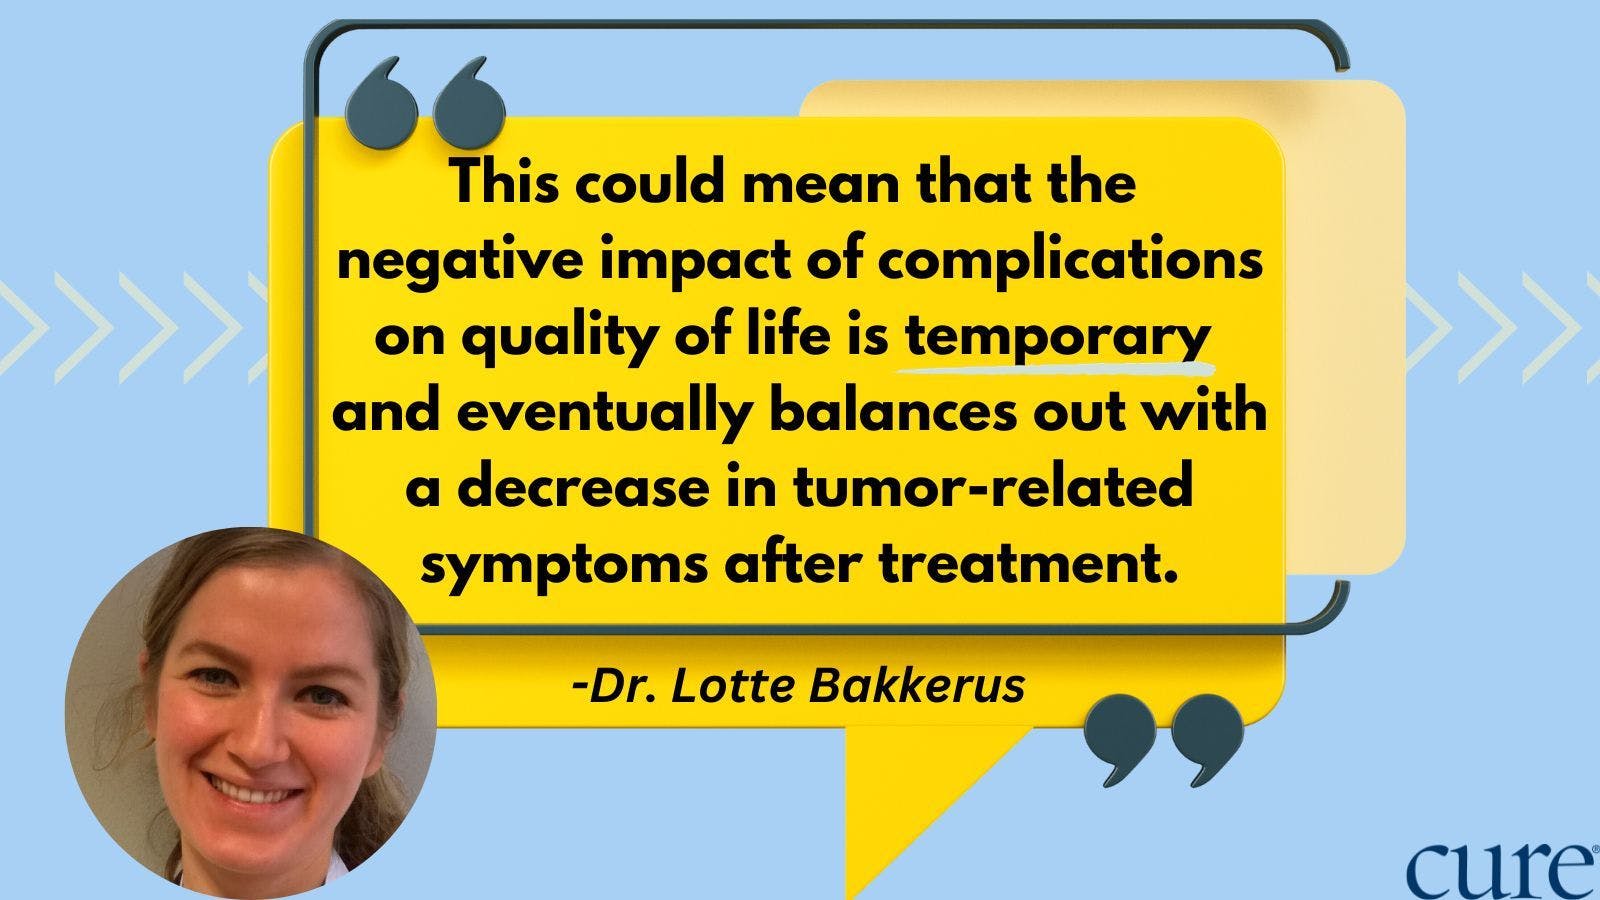 Negative quality of life impacts from intensified colorectal cancer treatment may be temporary, Dr. Lotte Bakkerus said. 